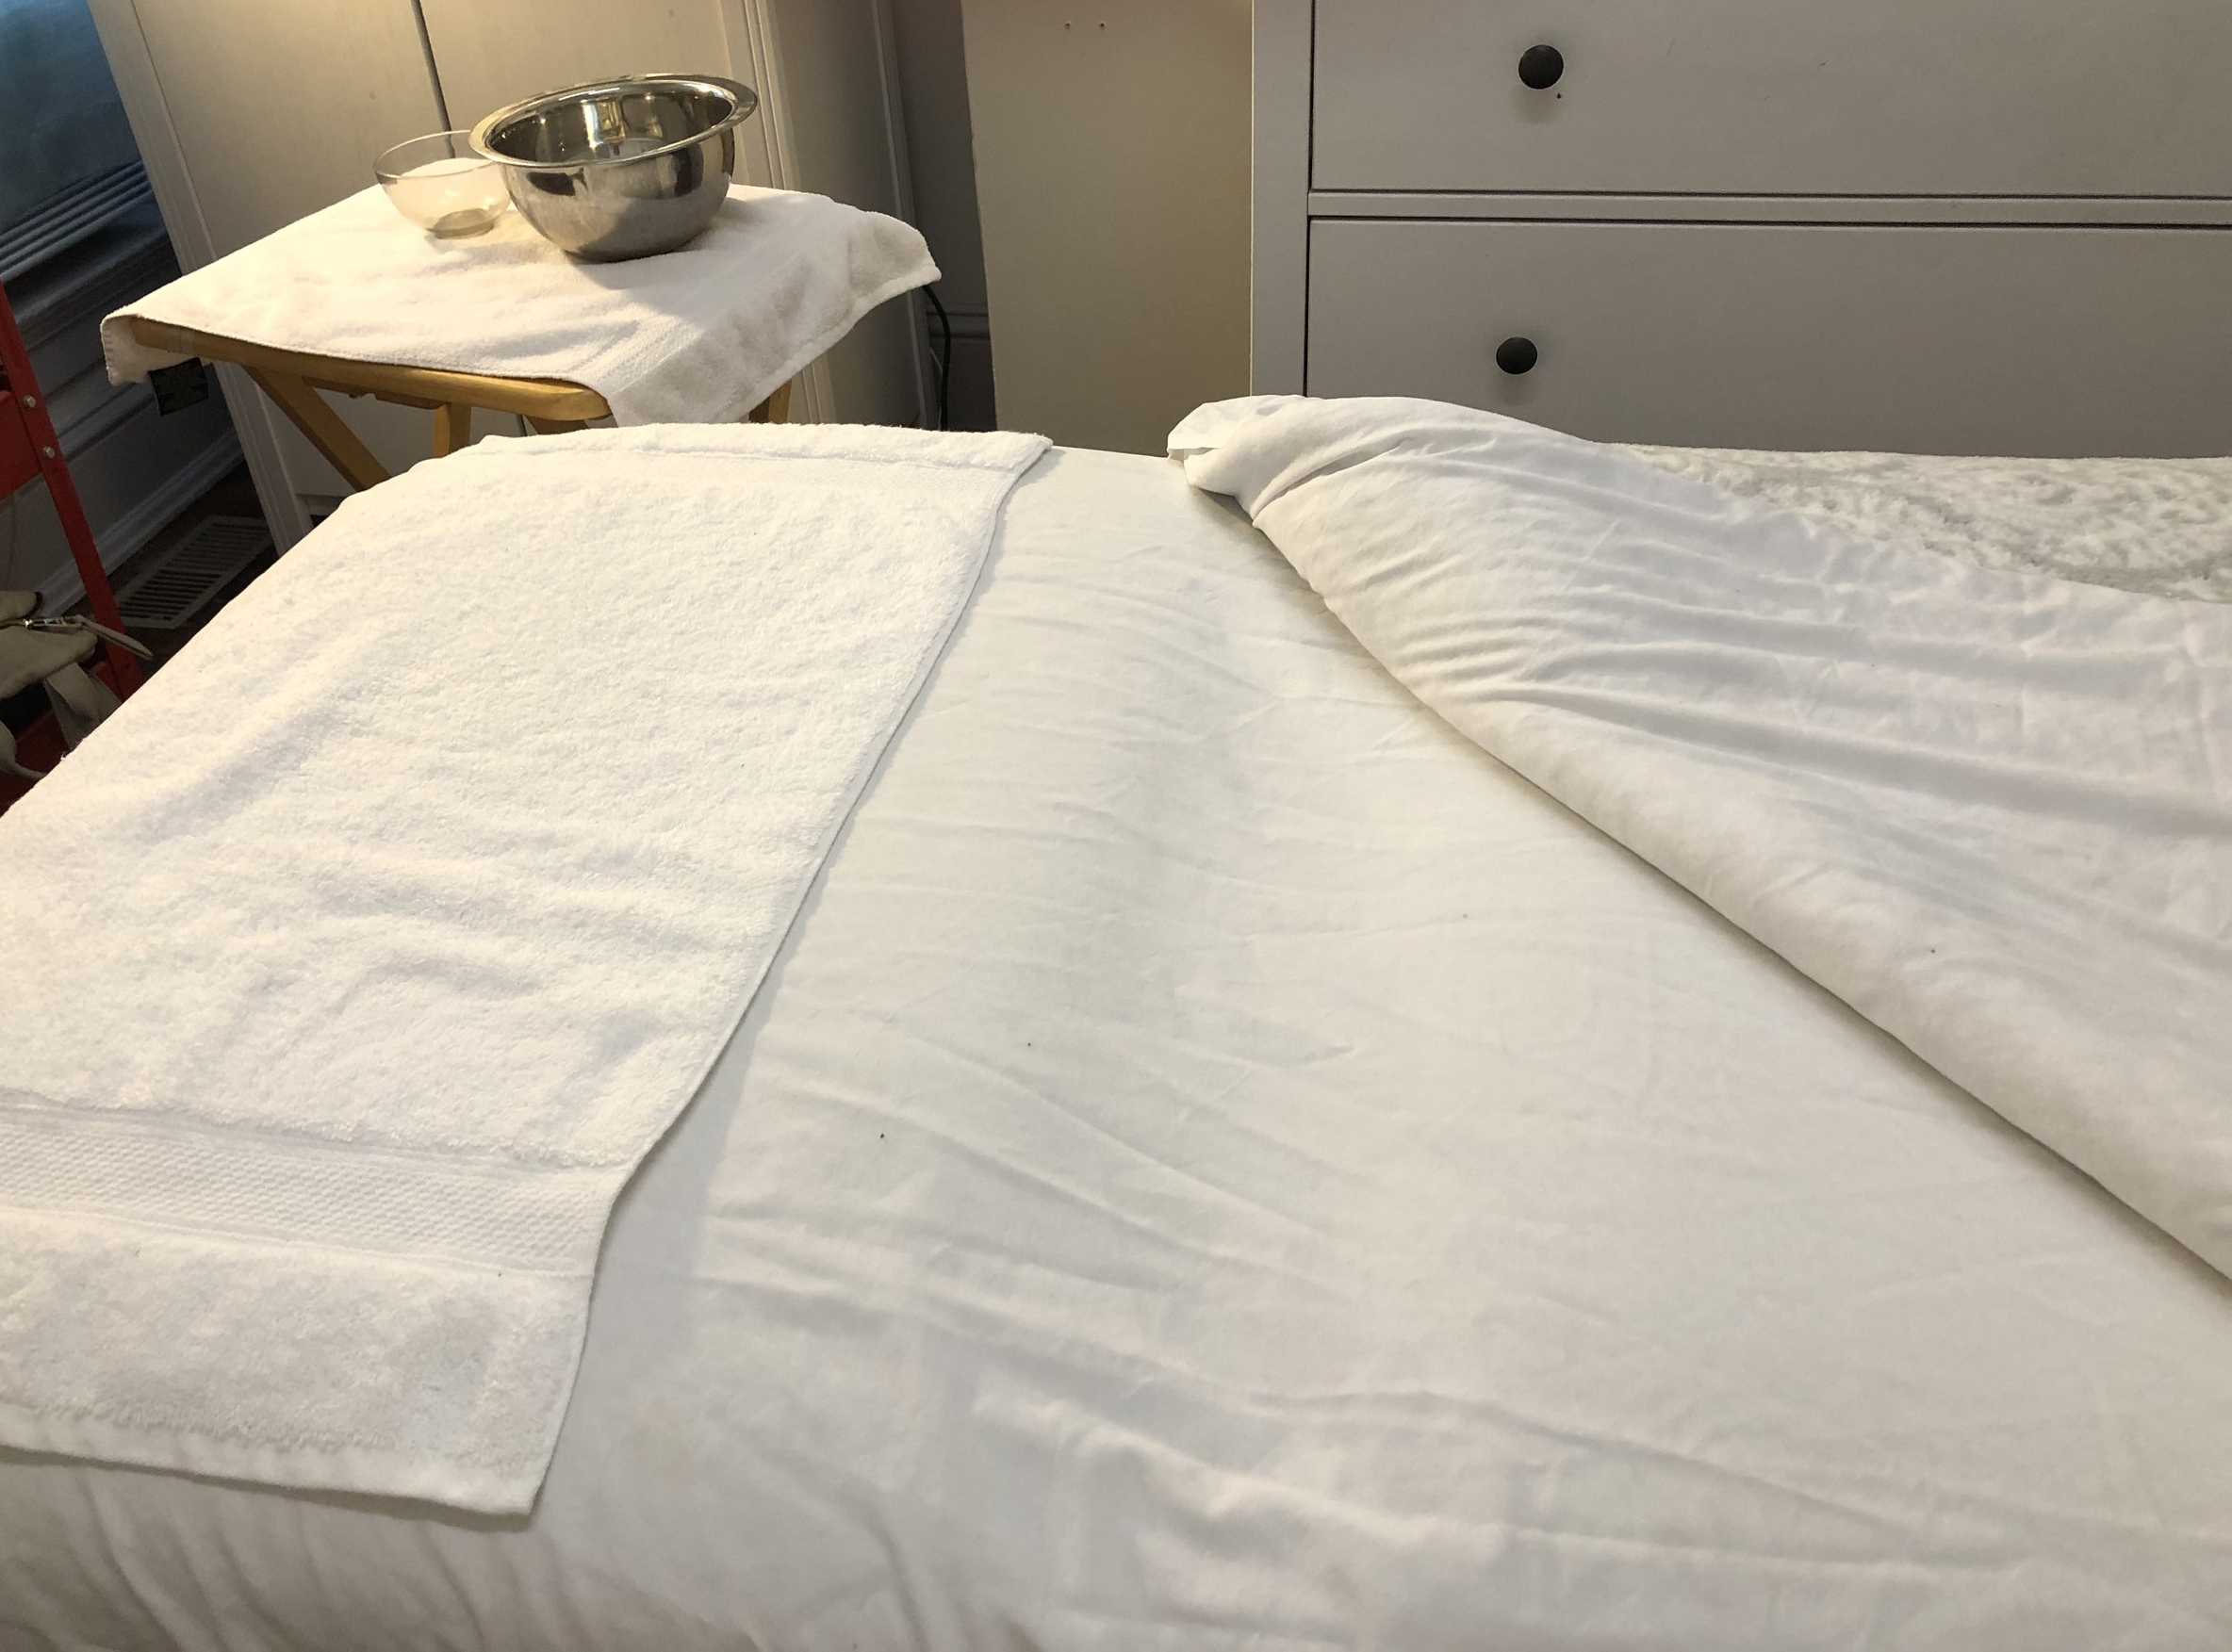 Massage table with white sheets in a spa room